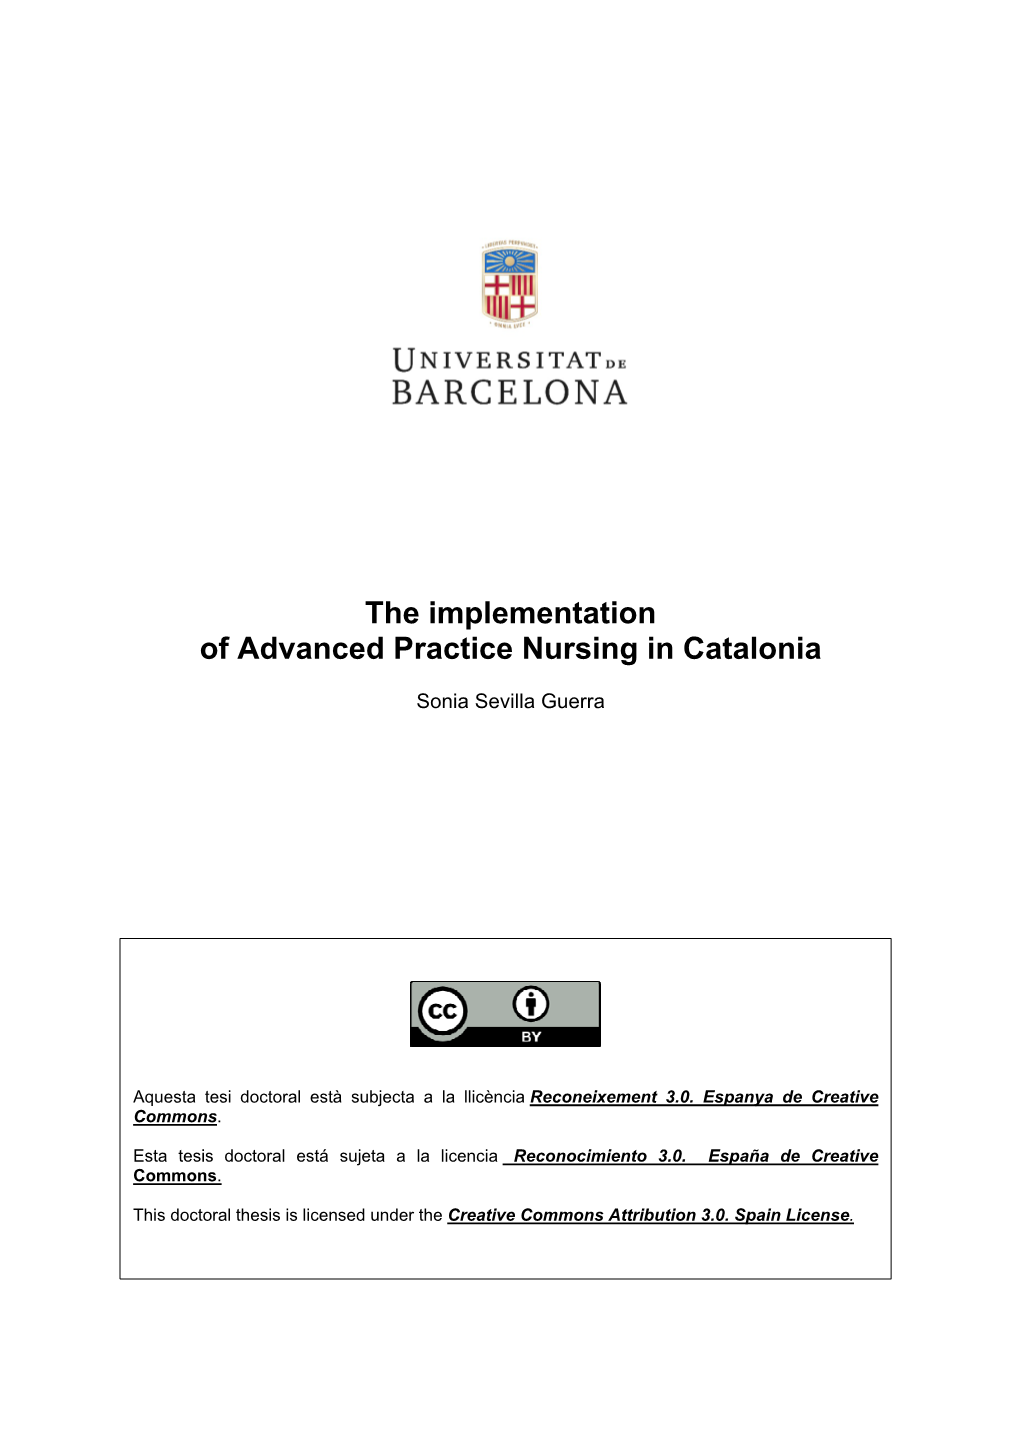 The Implementation of Advanced Practice Nursing in Catalonia